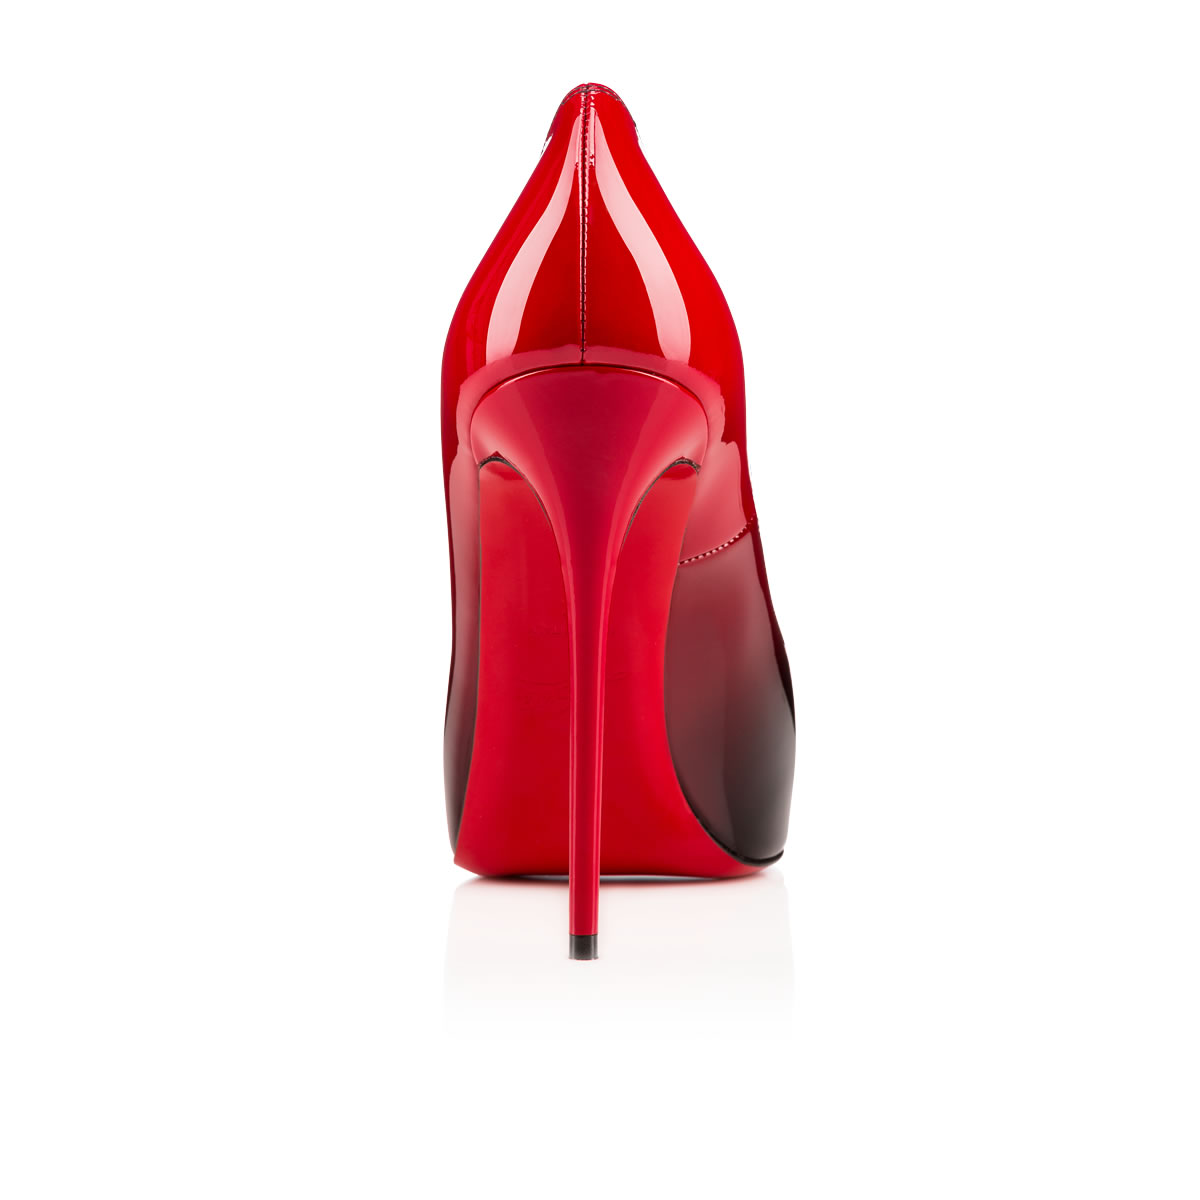 Christian Louboutin New Very Prive Patent Red Sole Pump